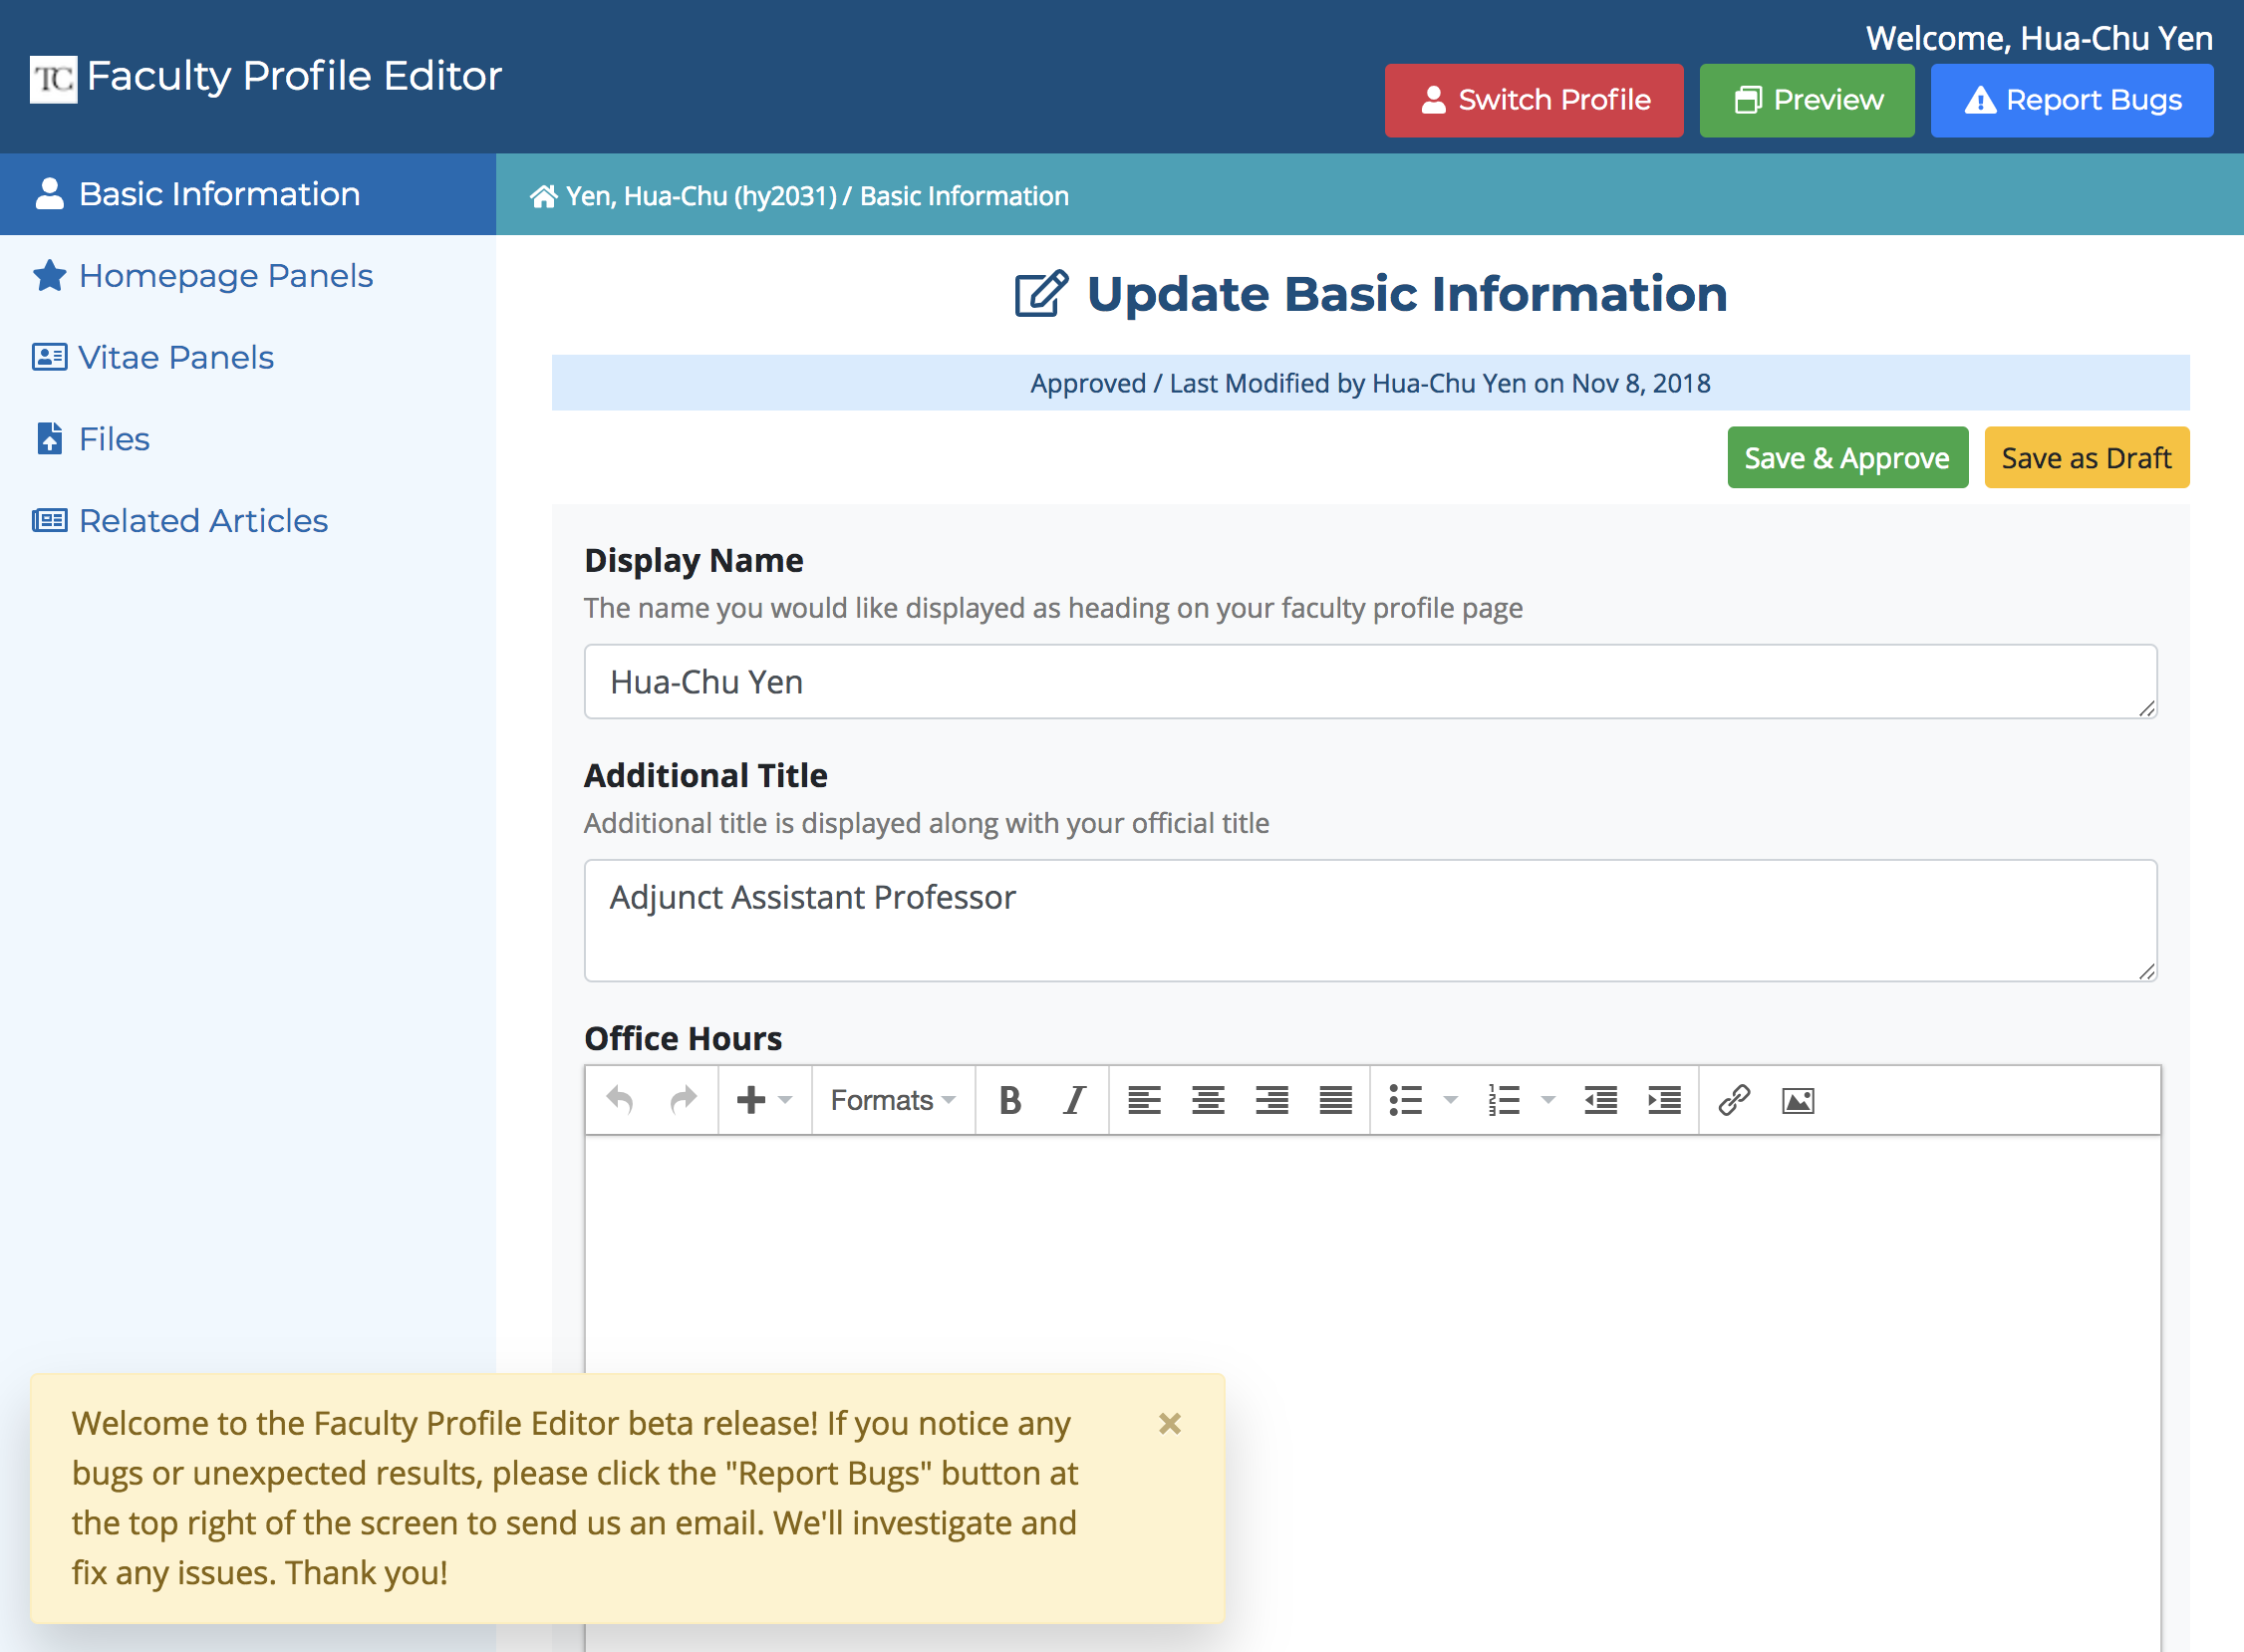 Screenshot of the basic information interface of the faculty profile editor tool